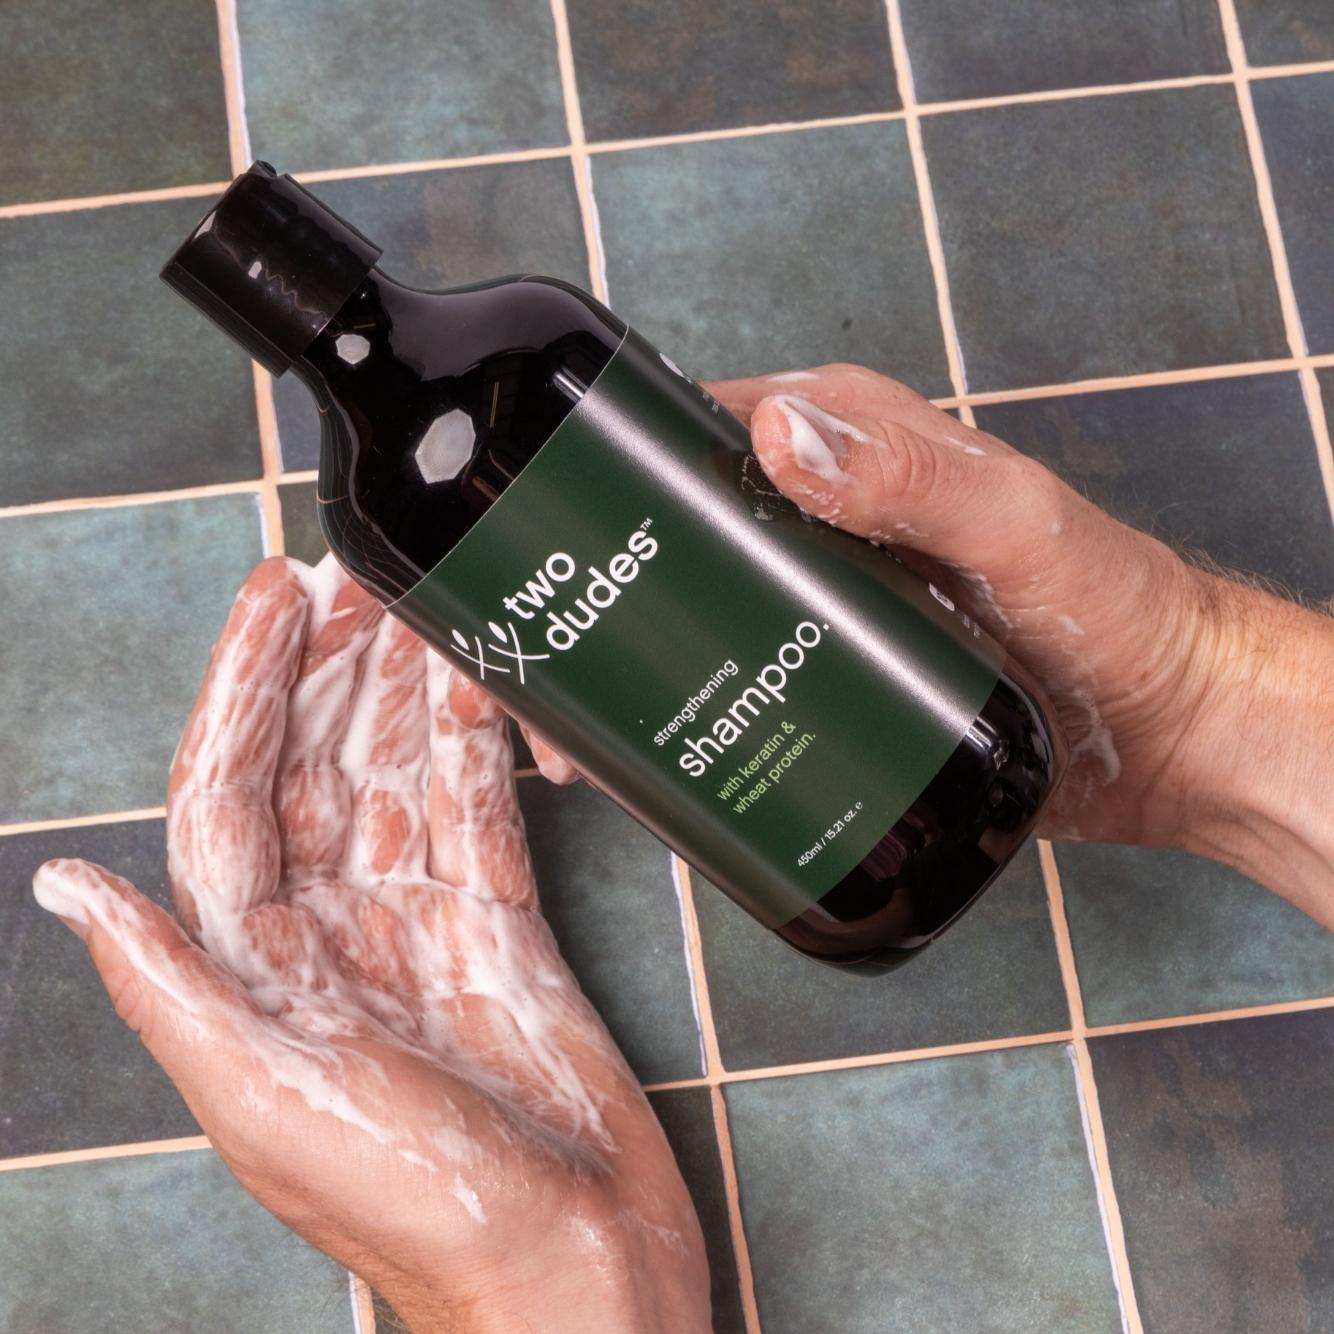 Two hands holding a bottle of "His" shampoo by giftbox co. over a tiled sink, with soapy water and suds visible. The setting suggests the shampoo is part of men's grooming products.